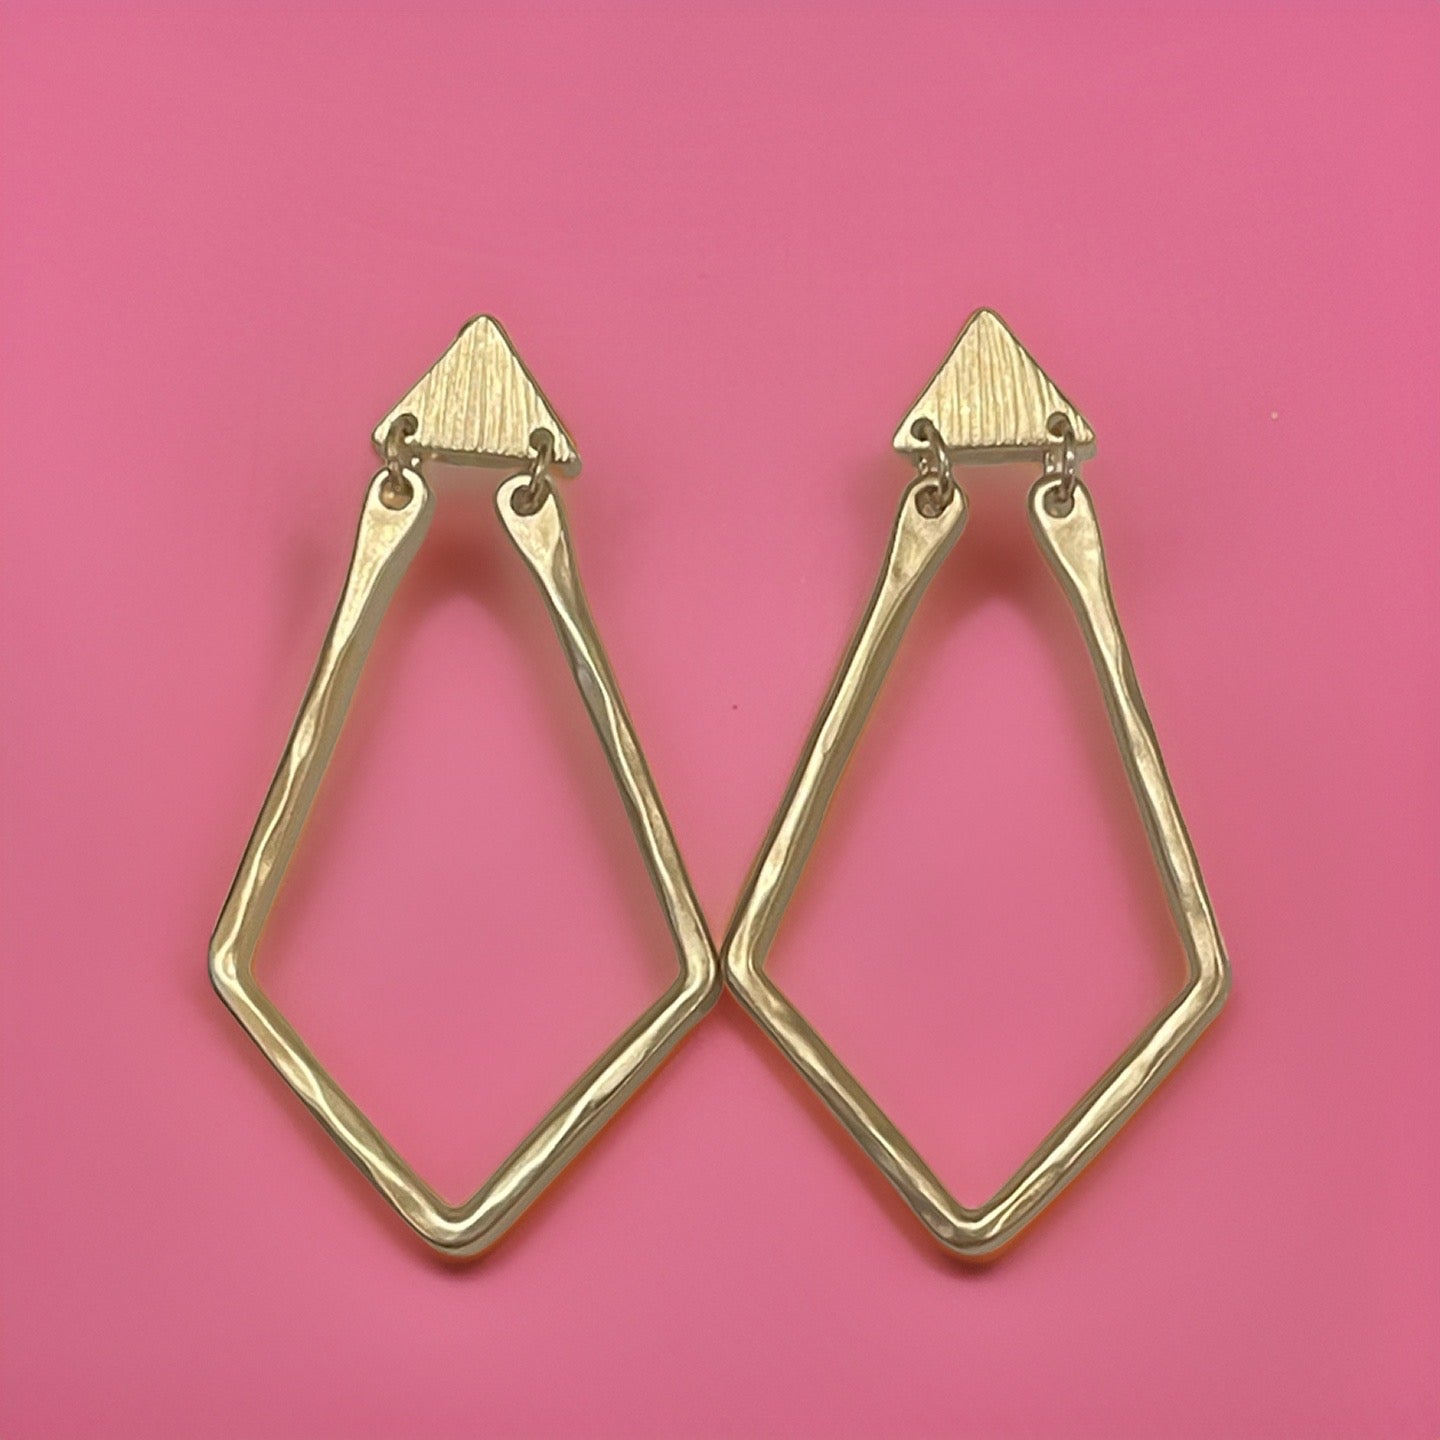 Brushed Tri Top Angled Teardrop Earrings - Available in Gold & Silver